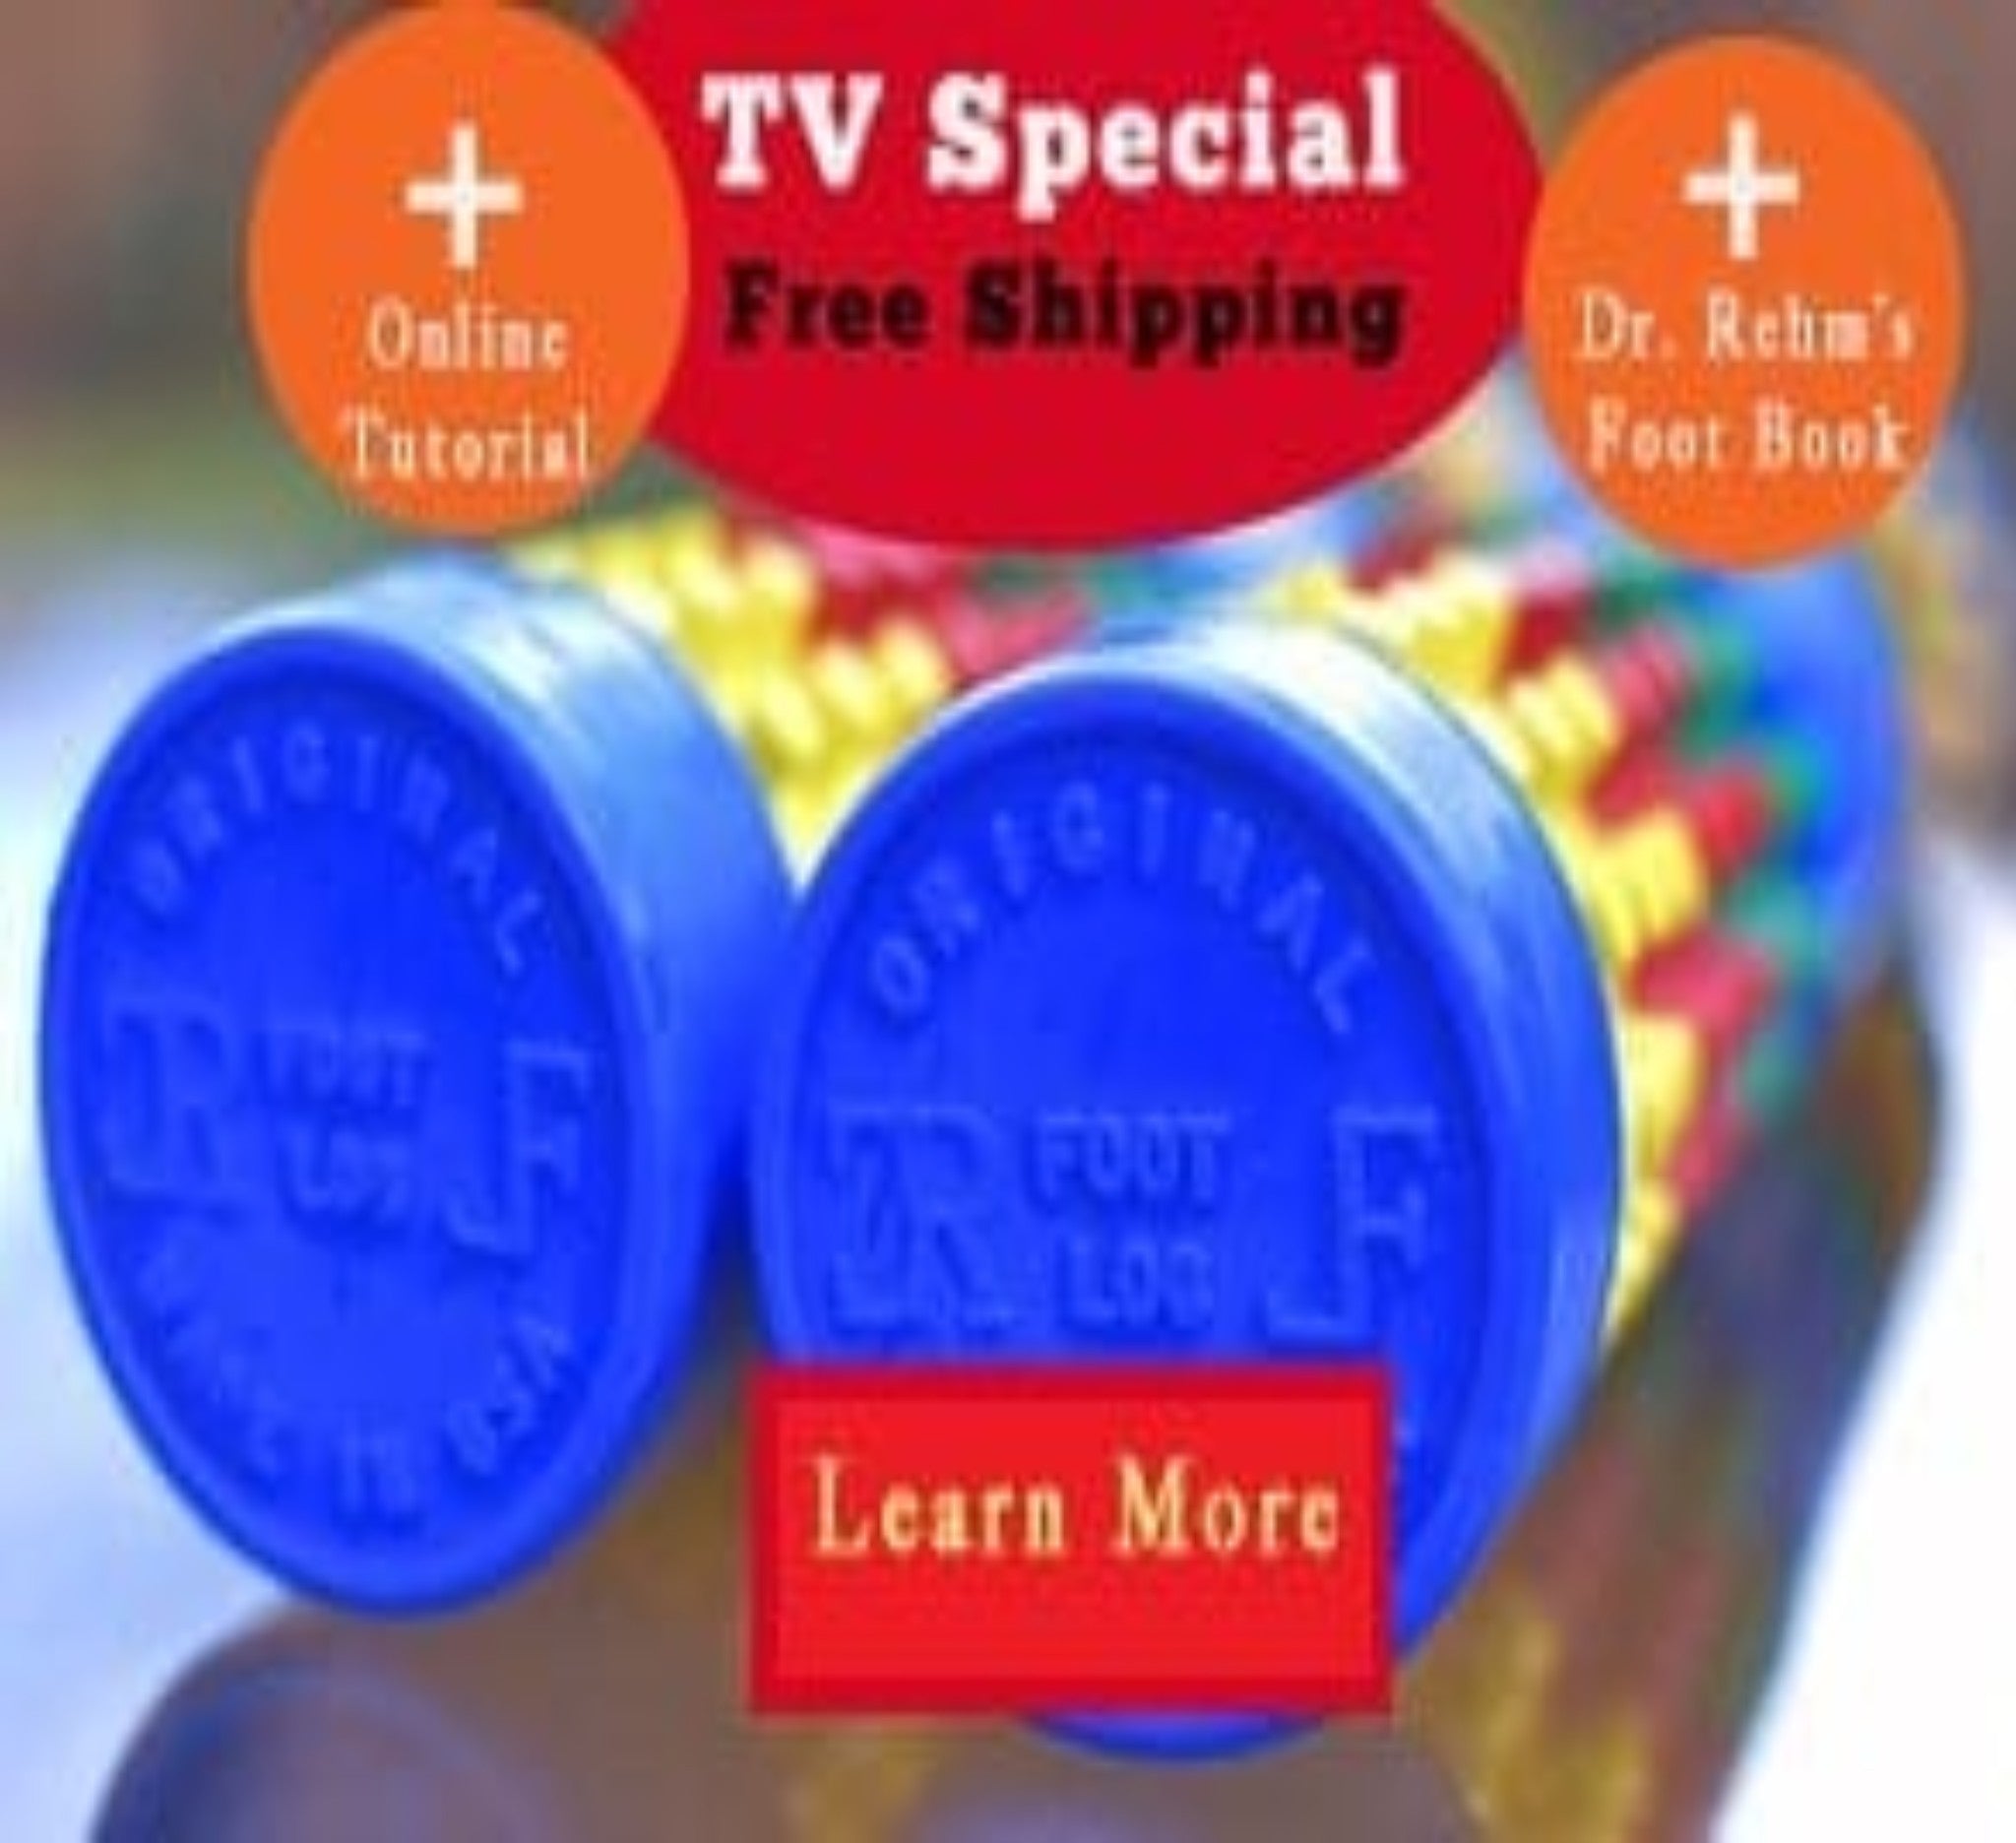 2 FootLogs (A Rainbow) – Tv Special + Free Shipping